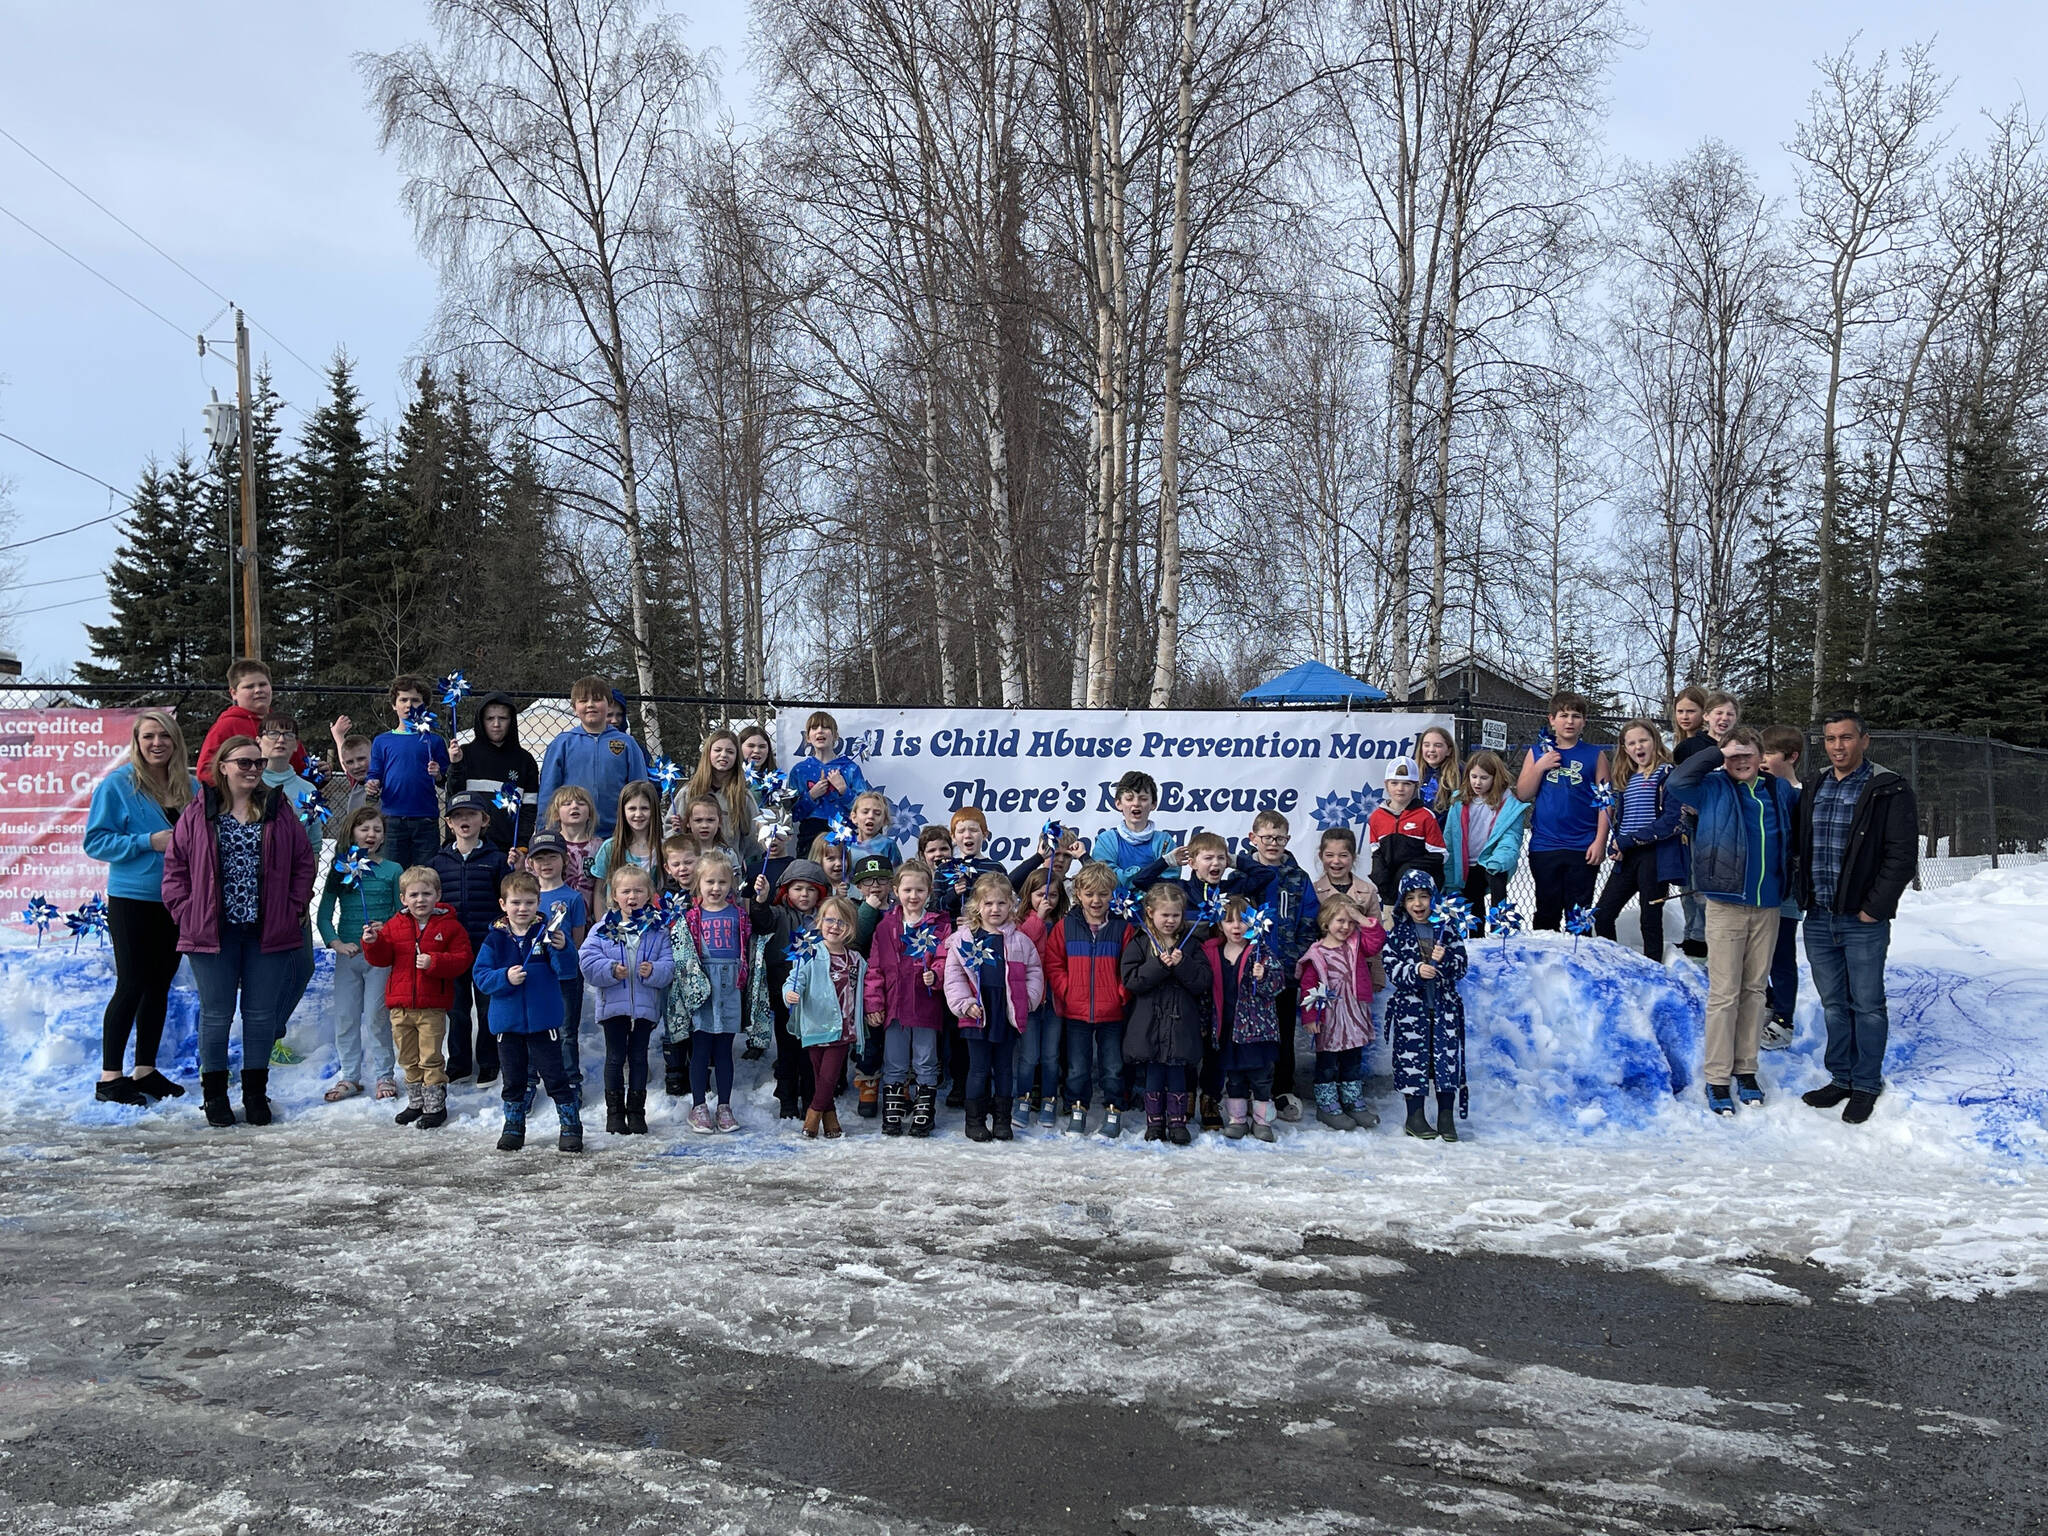 Students and teachers gather with pinwheels in hand in front of snow painted blue at The Study in Soldotna, Alaska, as they commemorate Go Blue Day on Friday, March 31, 2023, to kick off Child Abuse Prevention Month. (Jake Dye/Peninsula Clarion)